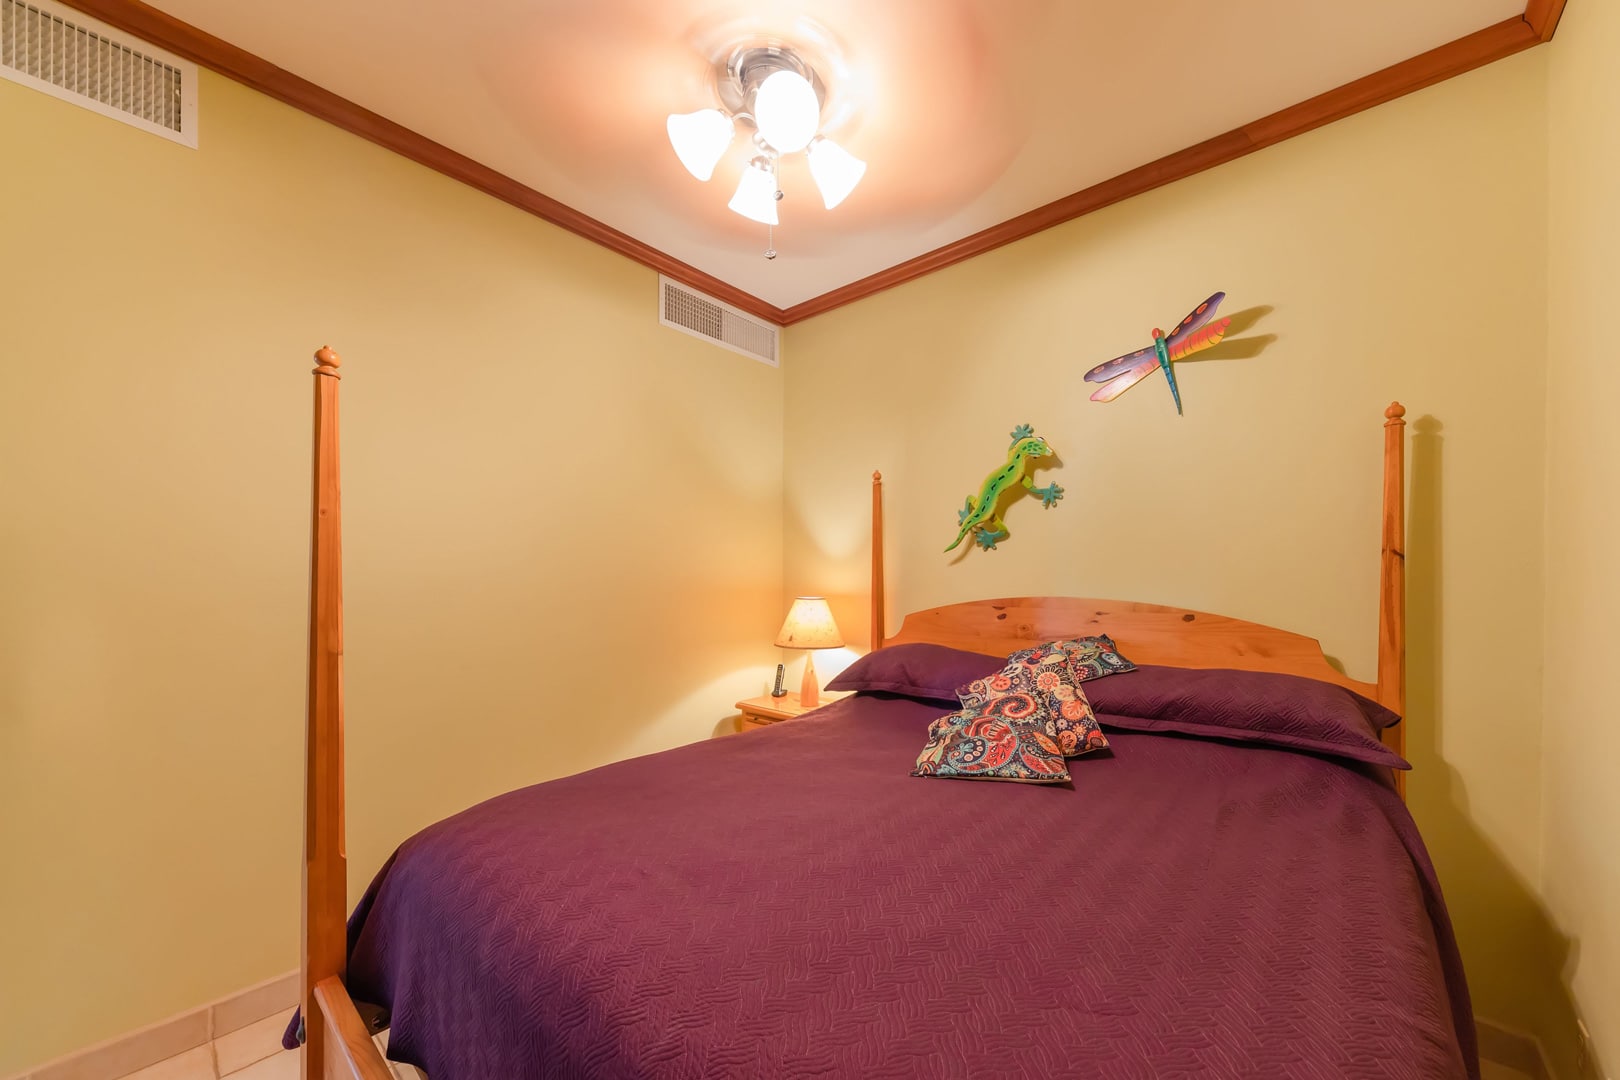 Cozy bedroom with queen bed, perfect for accommodating children or additional guests, adorned with tropical touches.